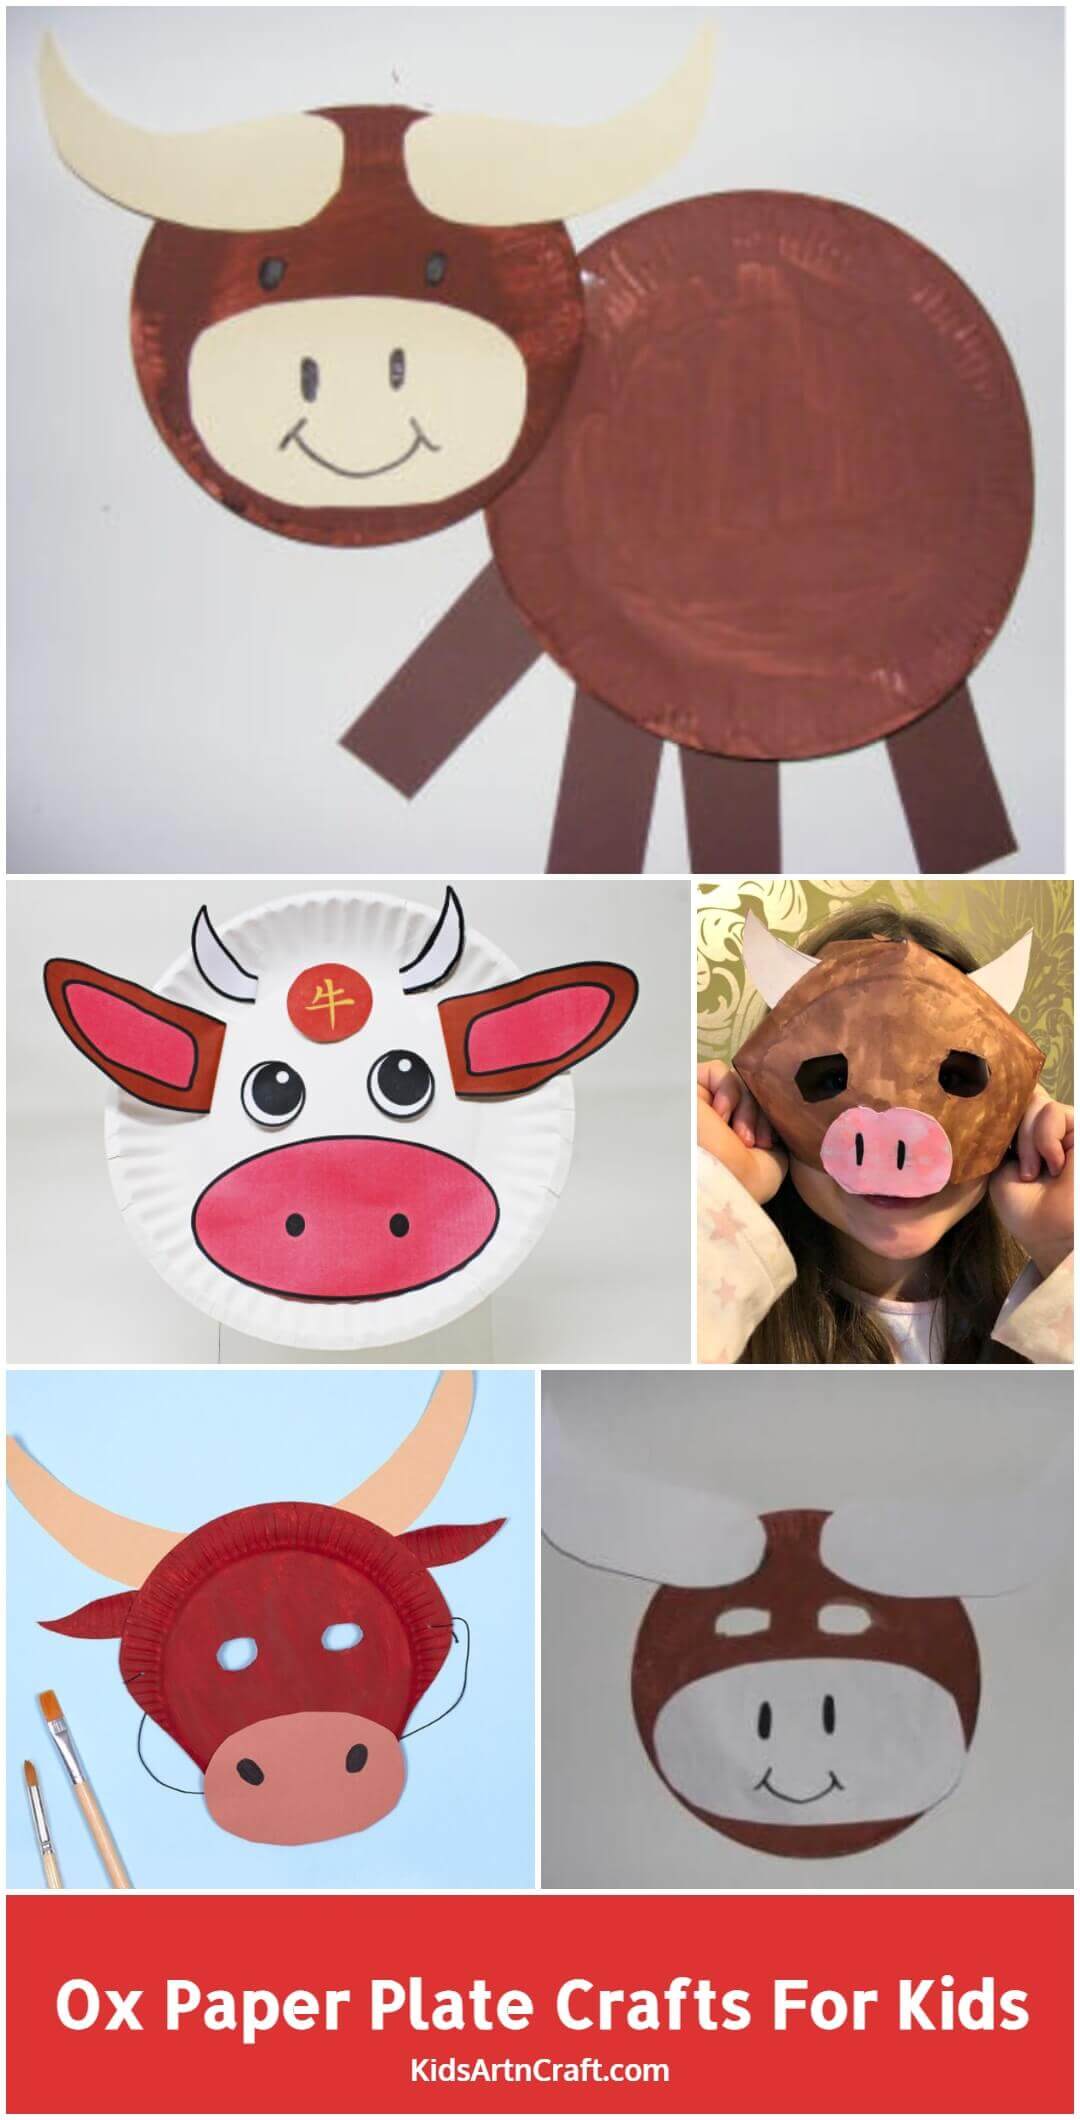 Ox Paper Plate Crafts for Kids